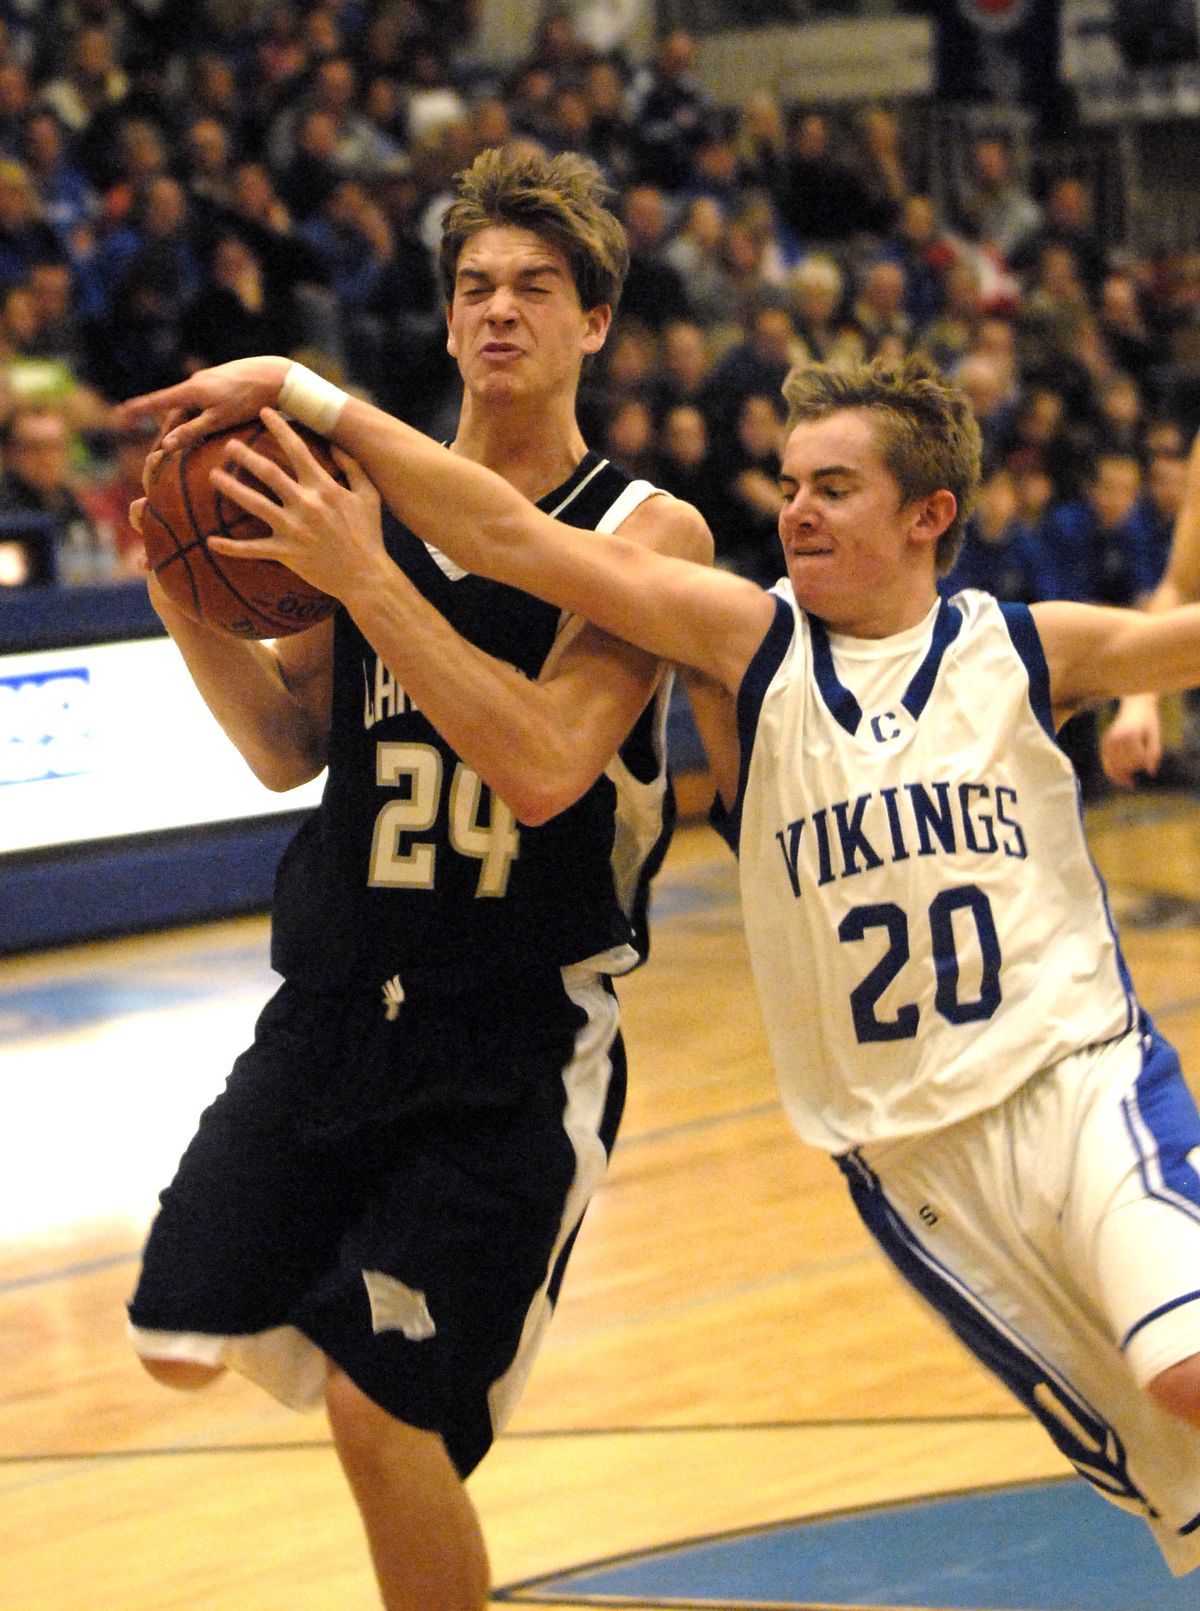 Connor White, right, tries to disrupt the fast break of LC’s Nate Frisbie. (Jesse Tinsley / The Spokesman-Review)